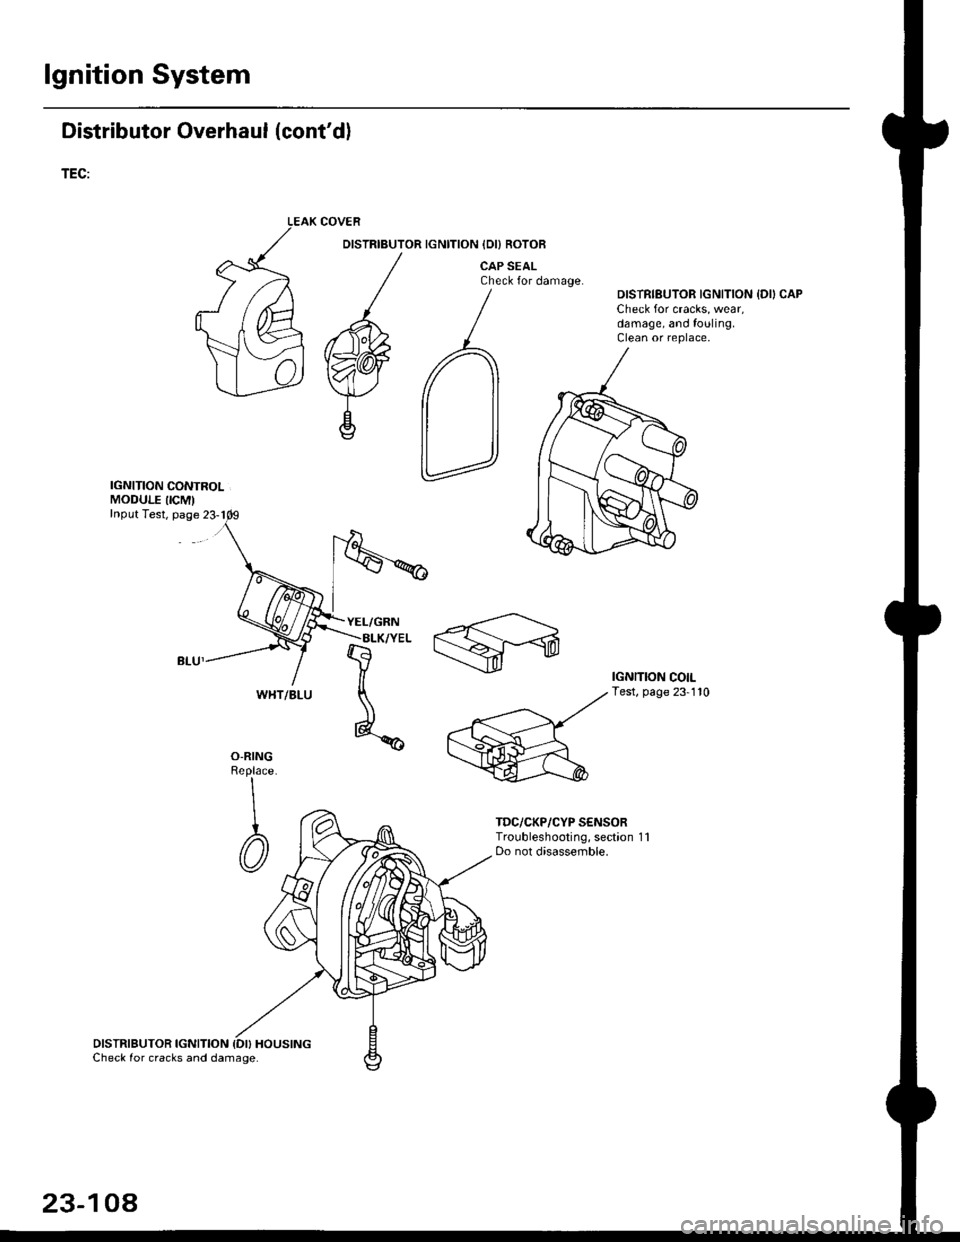 HONDA CIVIC 1996 6.G Workshop Manual lgnition System
Distributor Overhaul (contdl
TEC:
IGNITION CONTROLMODULE IICMInput Test, page 23-1
DISTRIBUTOR IGNITION {DI} HOUSINGCheck for cracks and damage.
COVER
DISTRIBUTOR IGNITION IDI) ROTOB